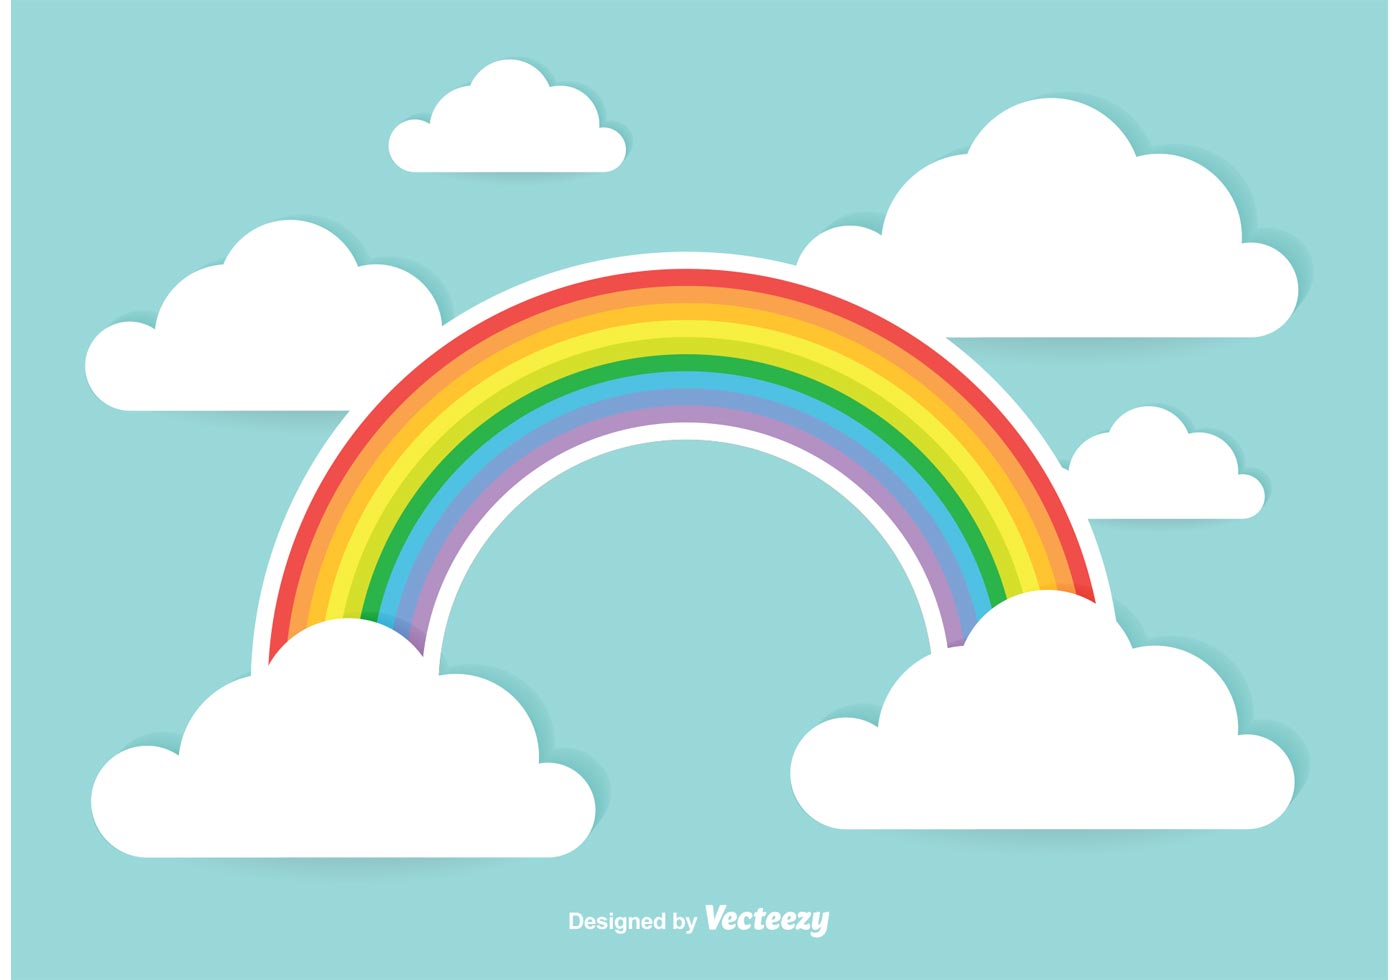 rainbow clipart free download - photo #49